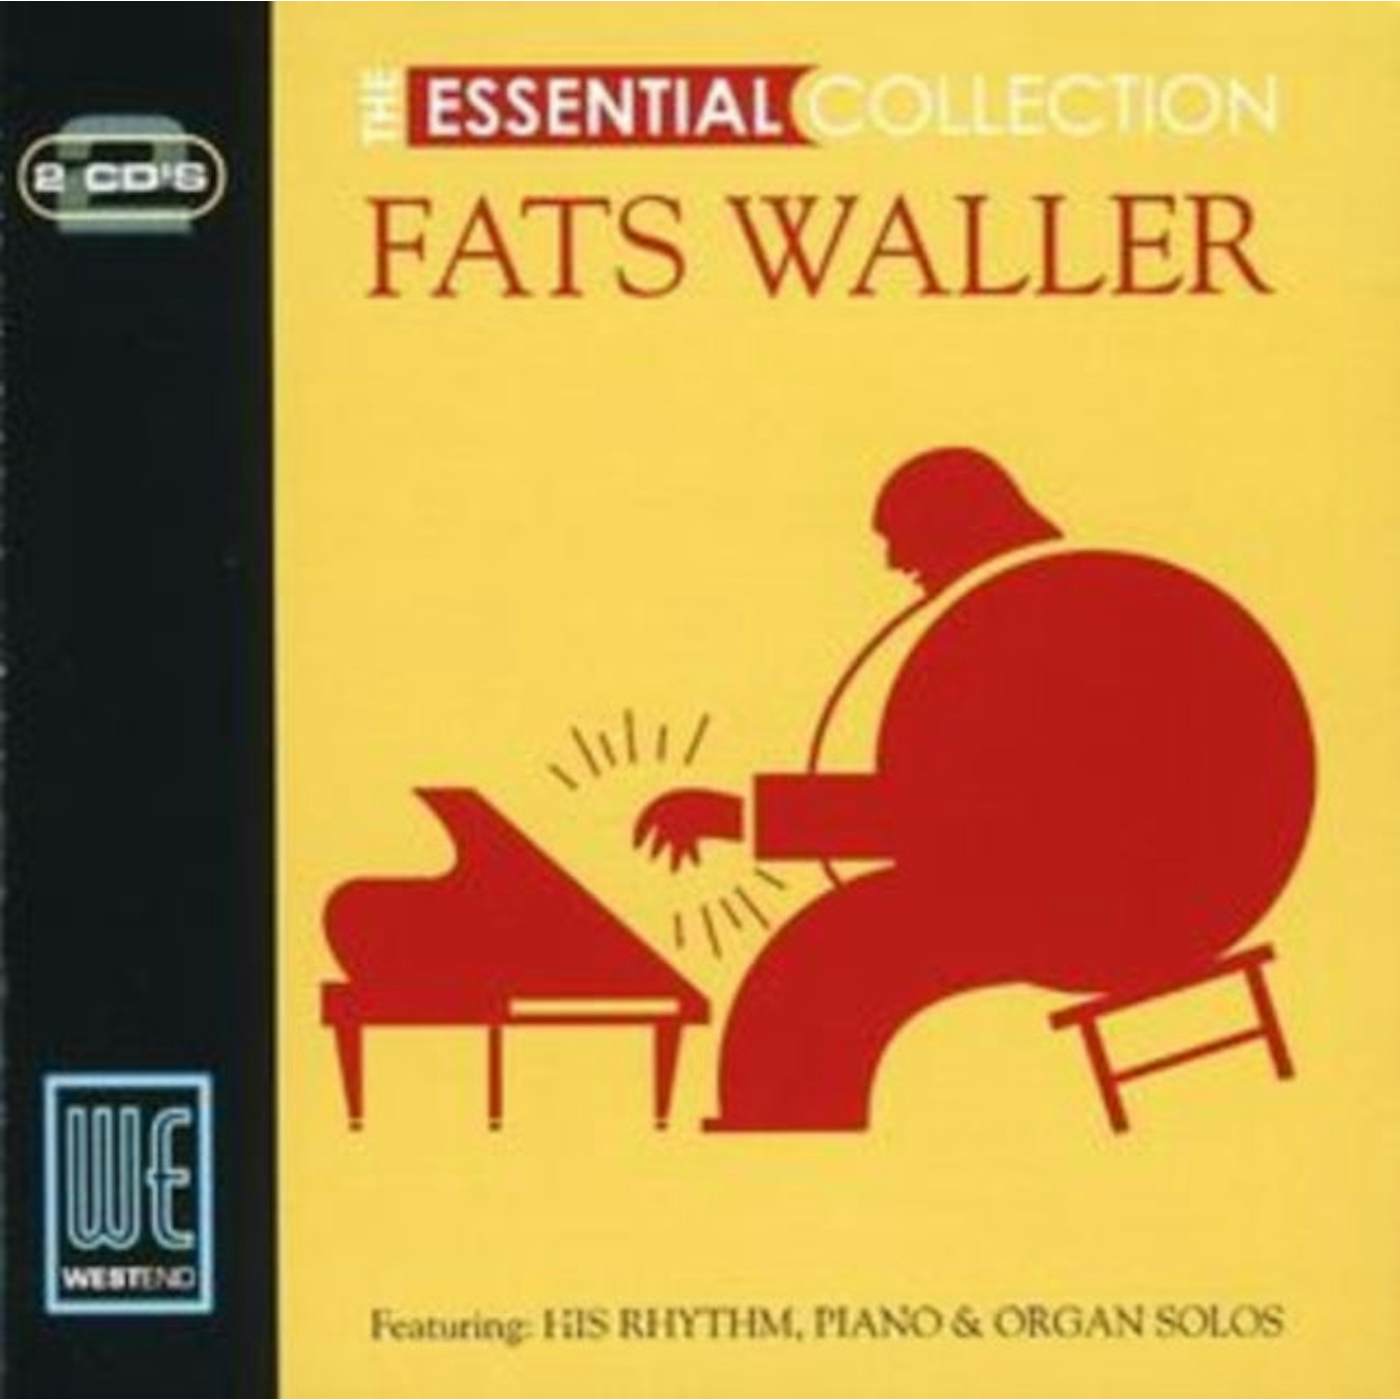 Fats Waller CD - The Essential Collection